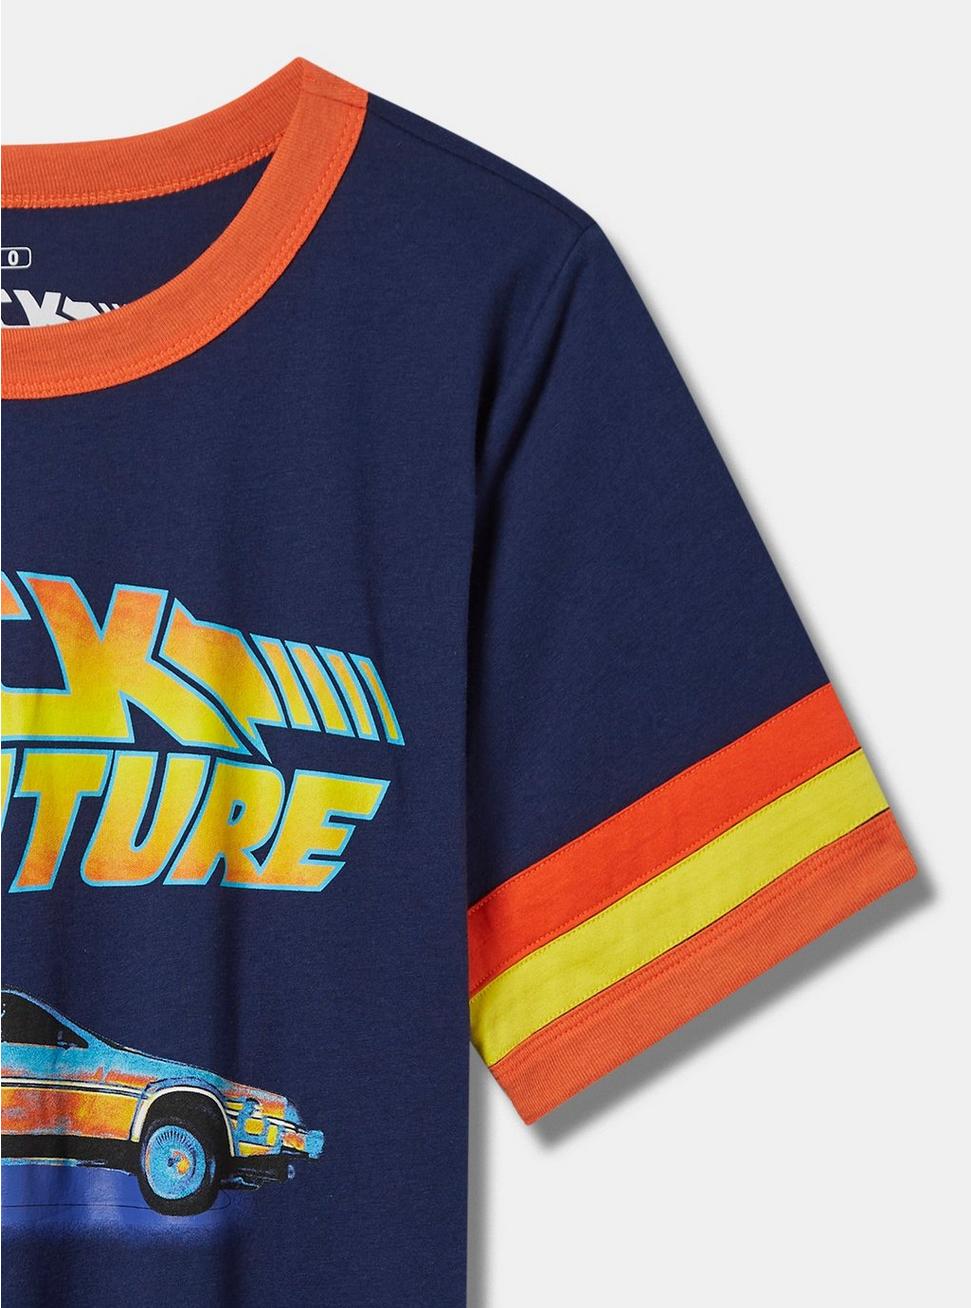 Back To The Future Classic Fit Cotton Ringer Tee, NAVY, alternate